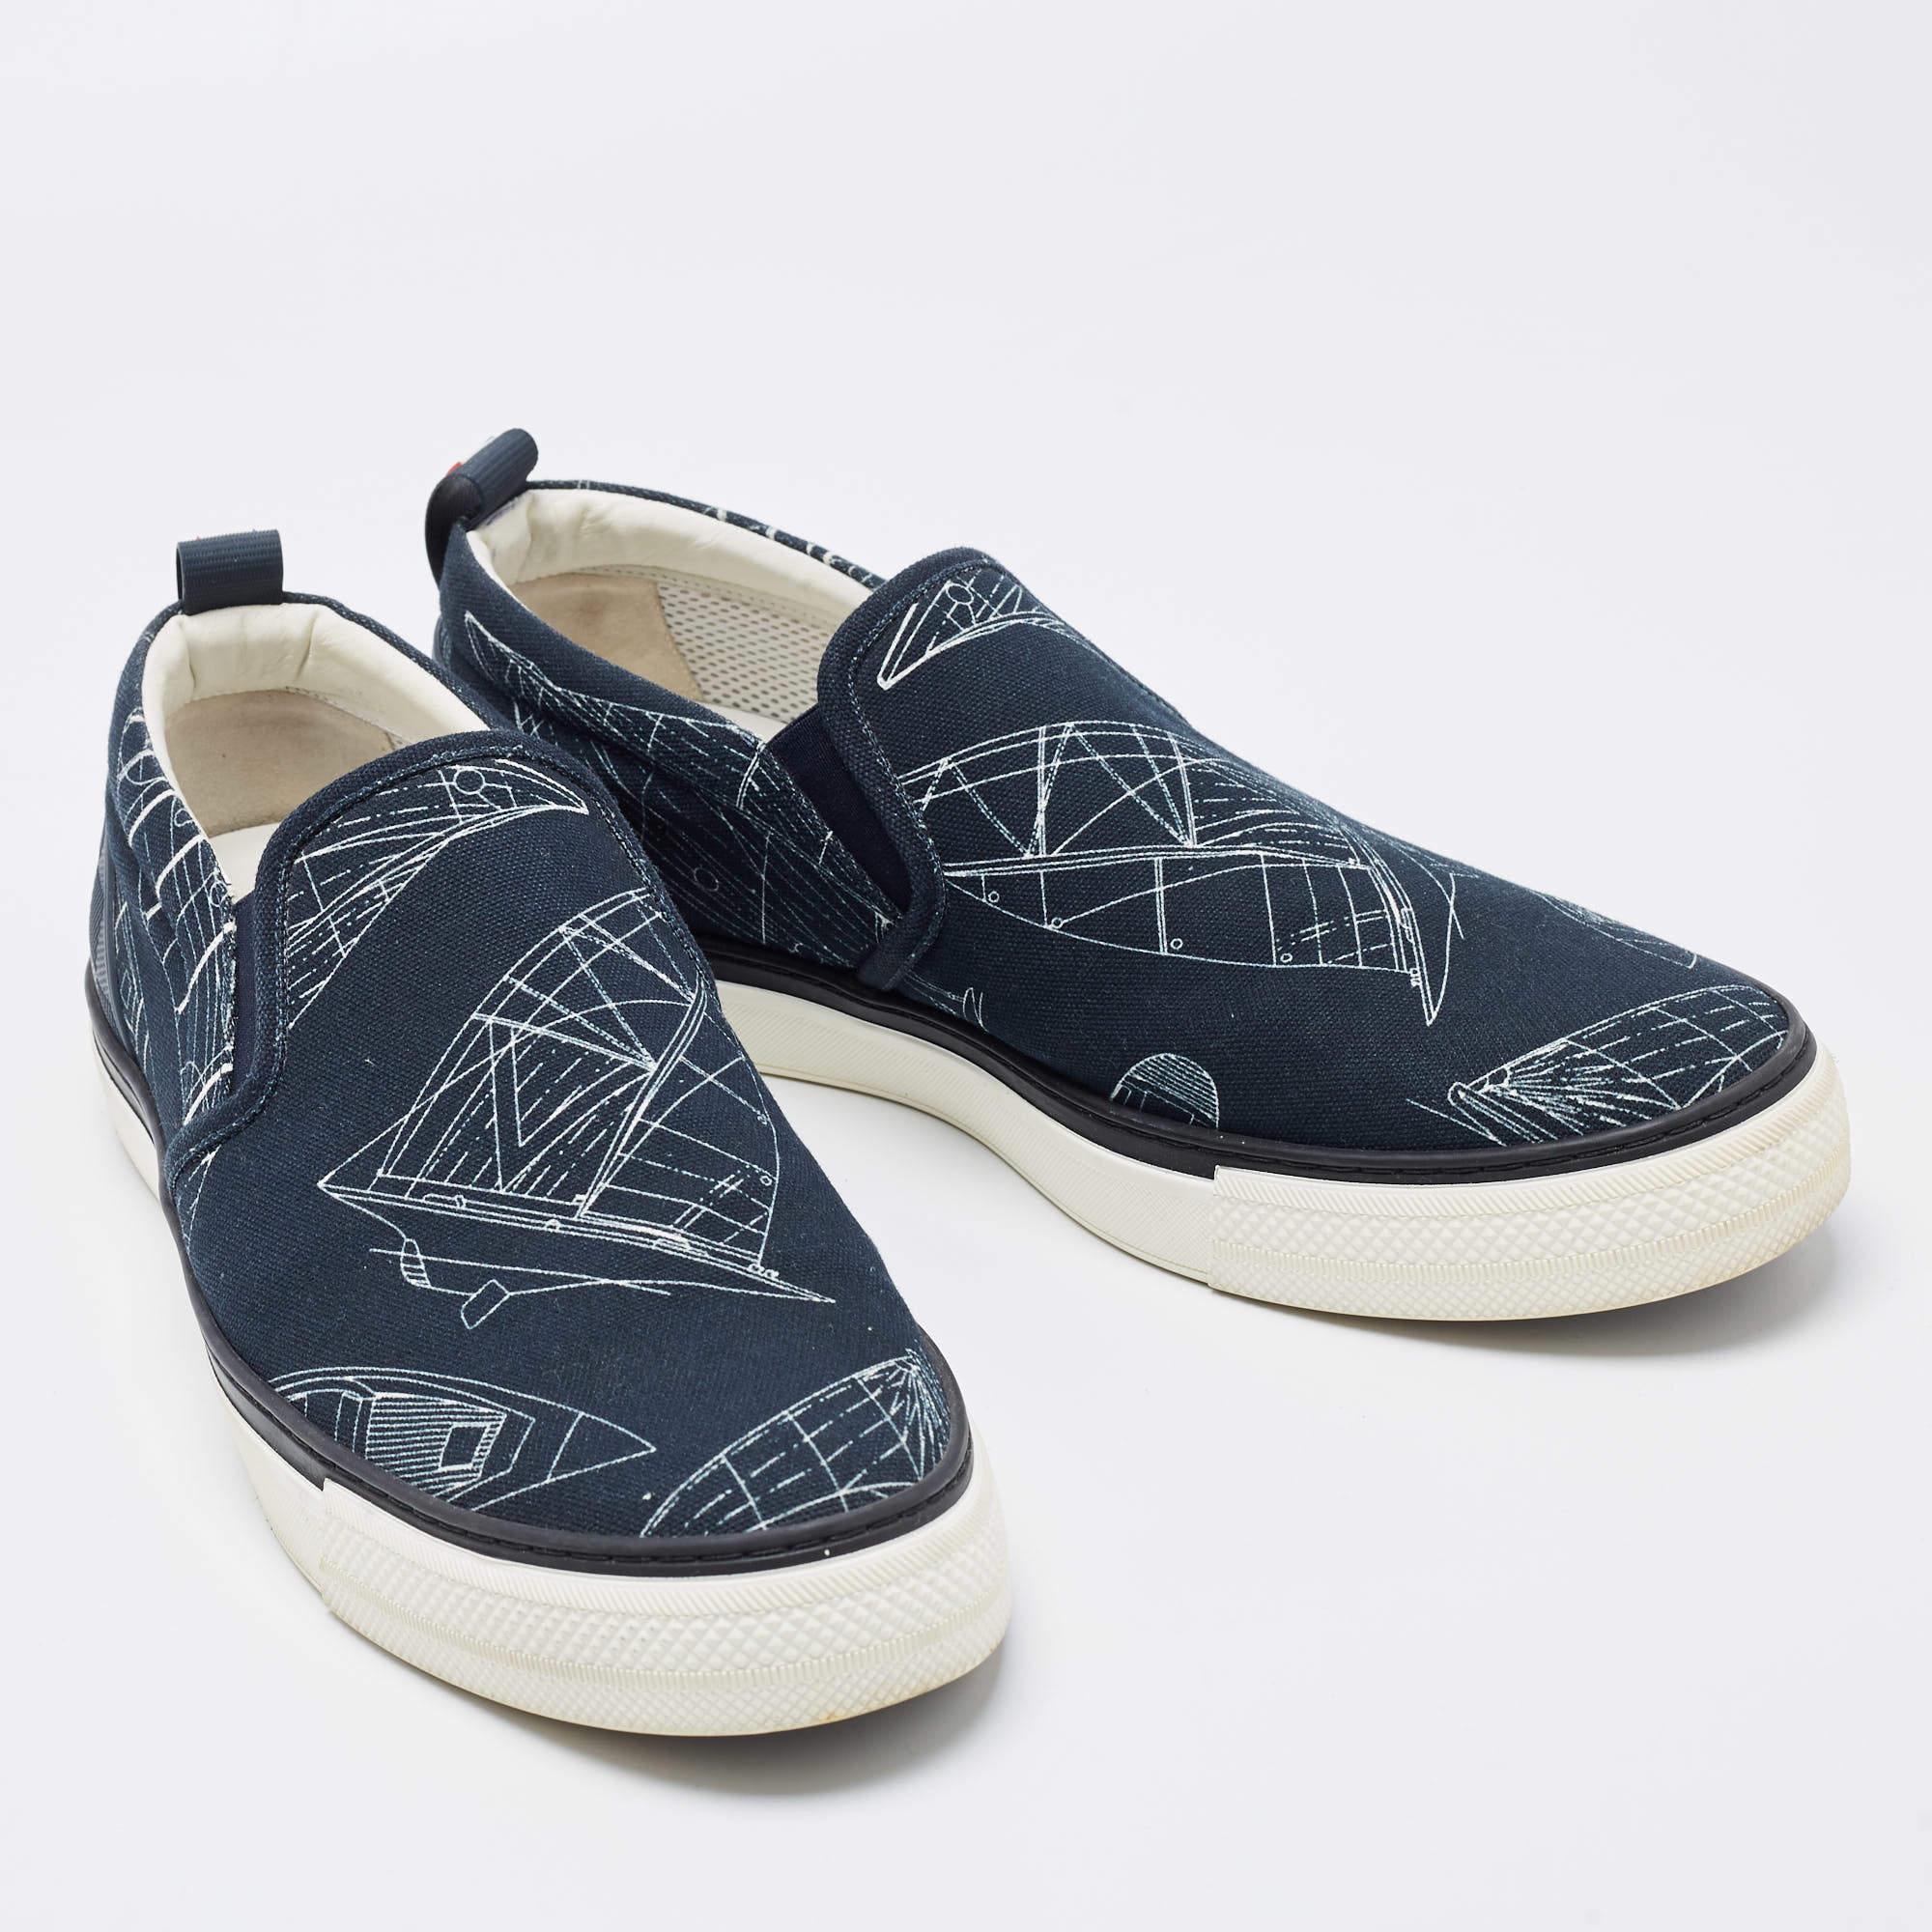 Upgrade your style with these LV sneakers. Meticulously designed for fashion and comfort, they're the ideal choice for a trendy and comfortable stride.

